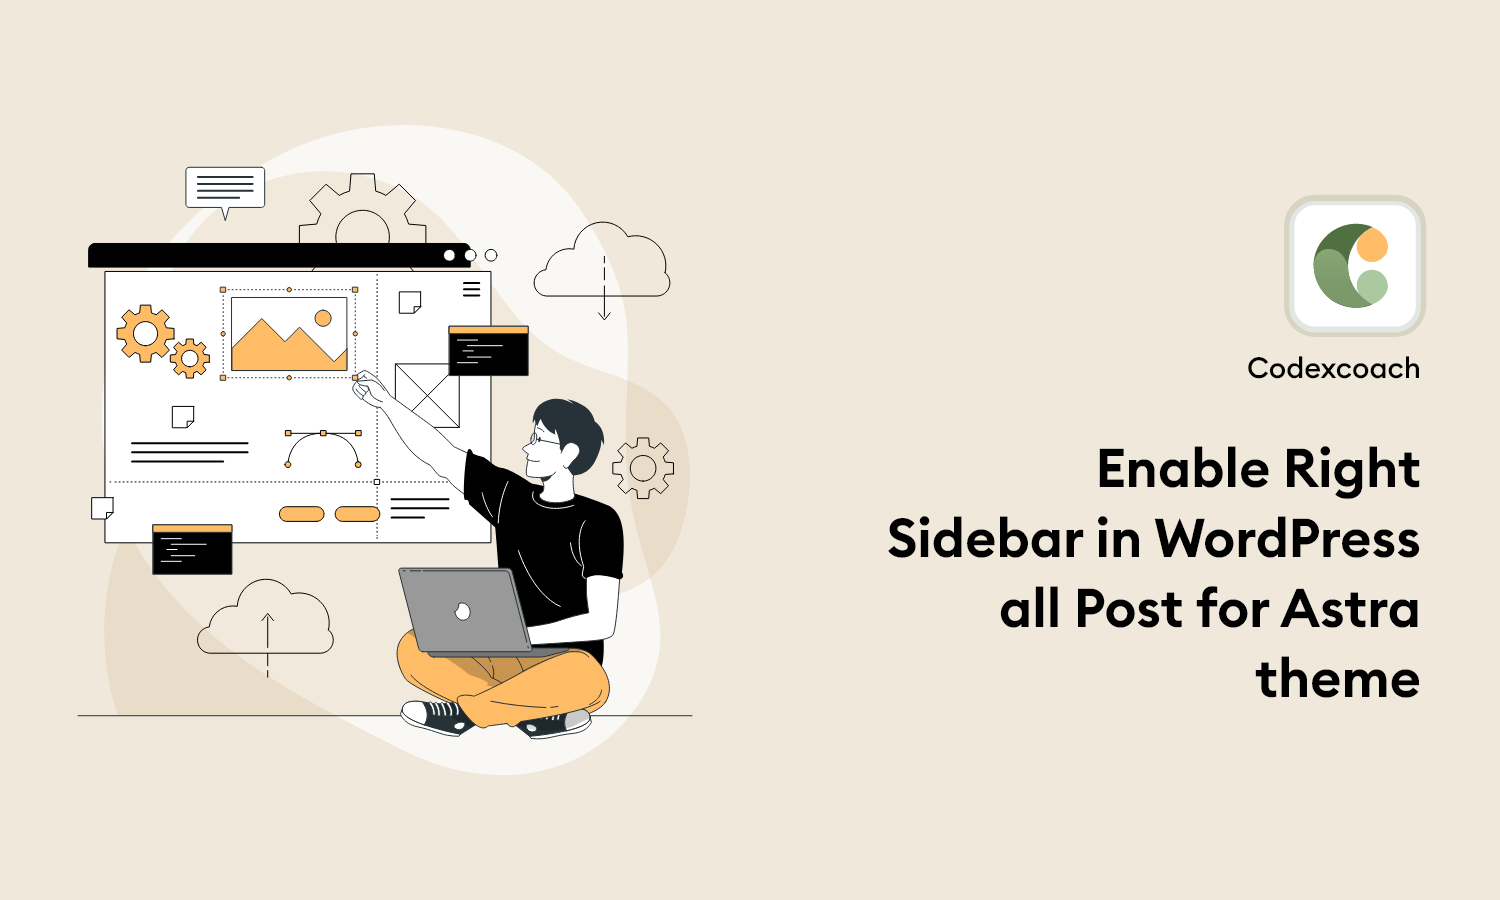 Enable Right Sidebar in WordPress all Post for Astra theme